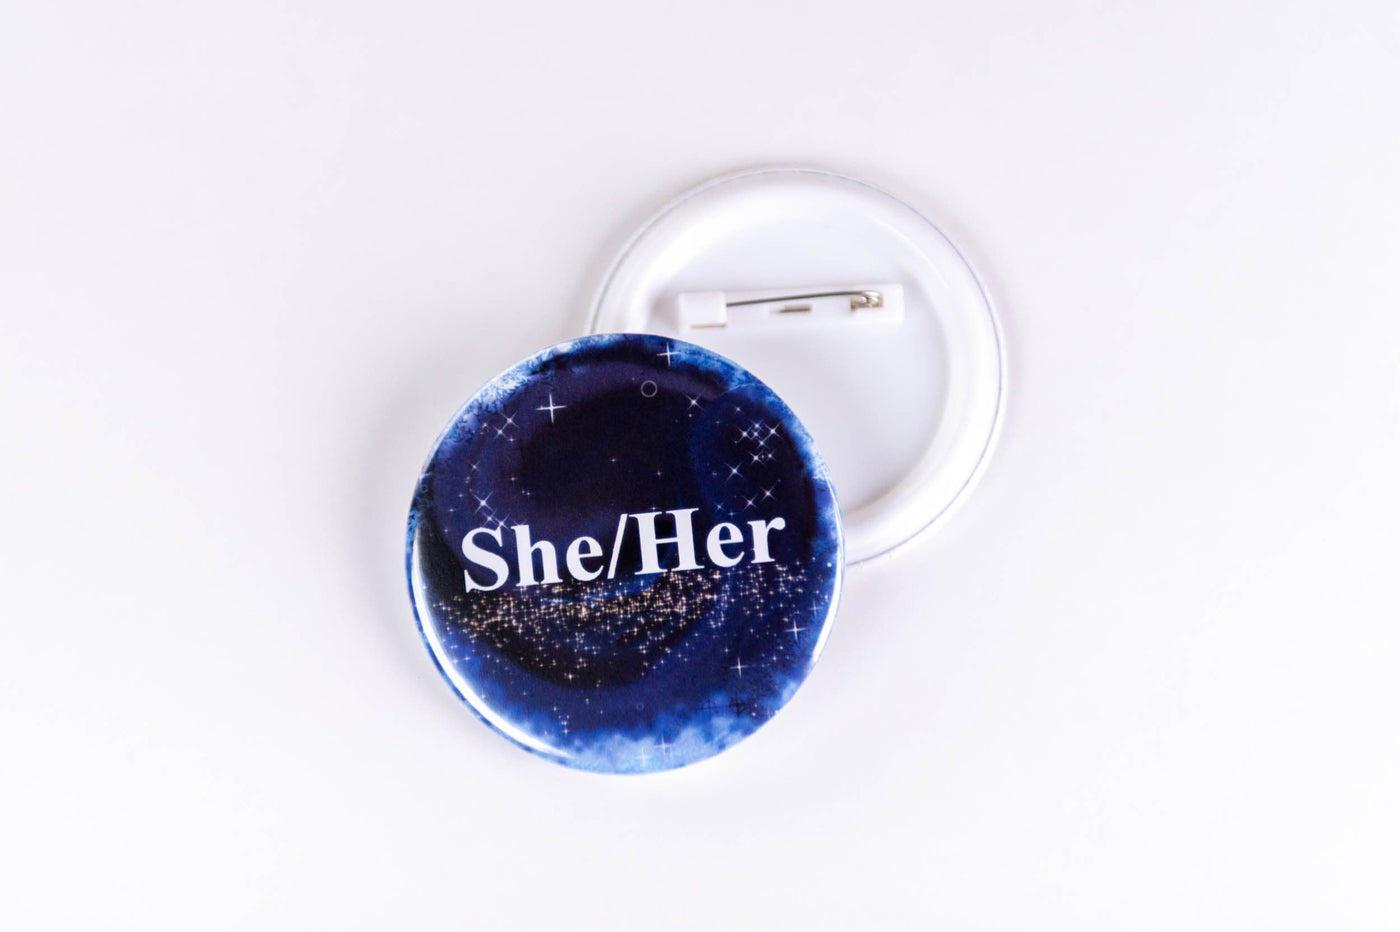 Accessory Pride Pronoun LGBT Pin Back Buttons by Princess Pumps She/Her